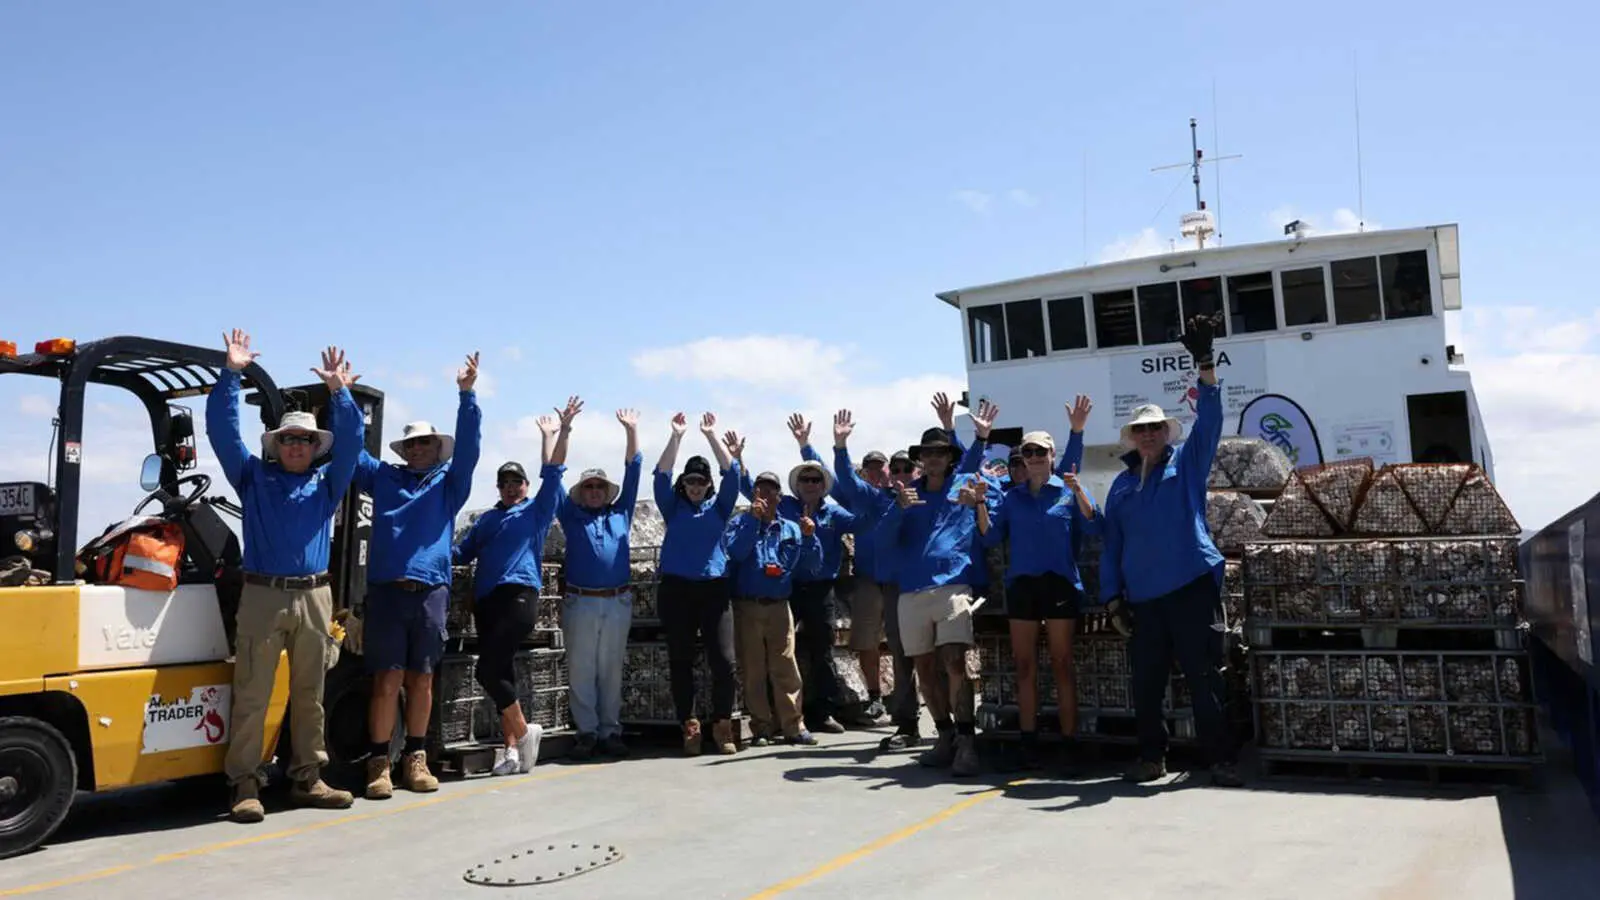 A group of people wearing blue shirts, standing on a boat with their arms in the air